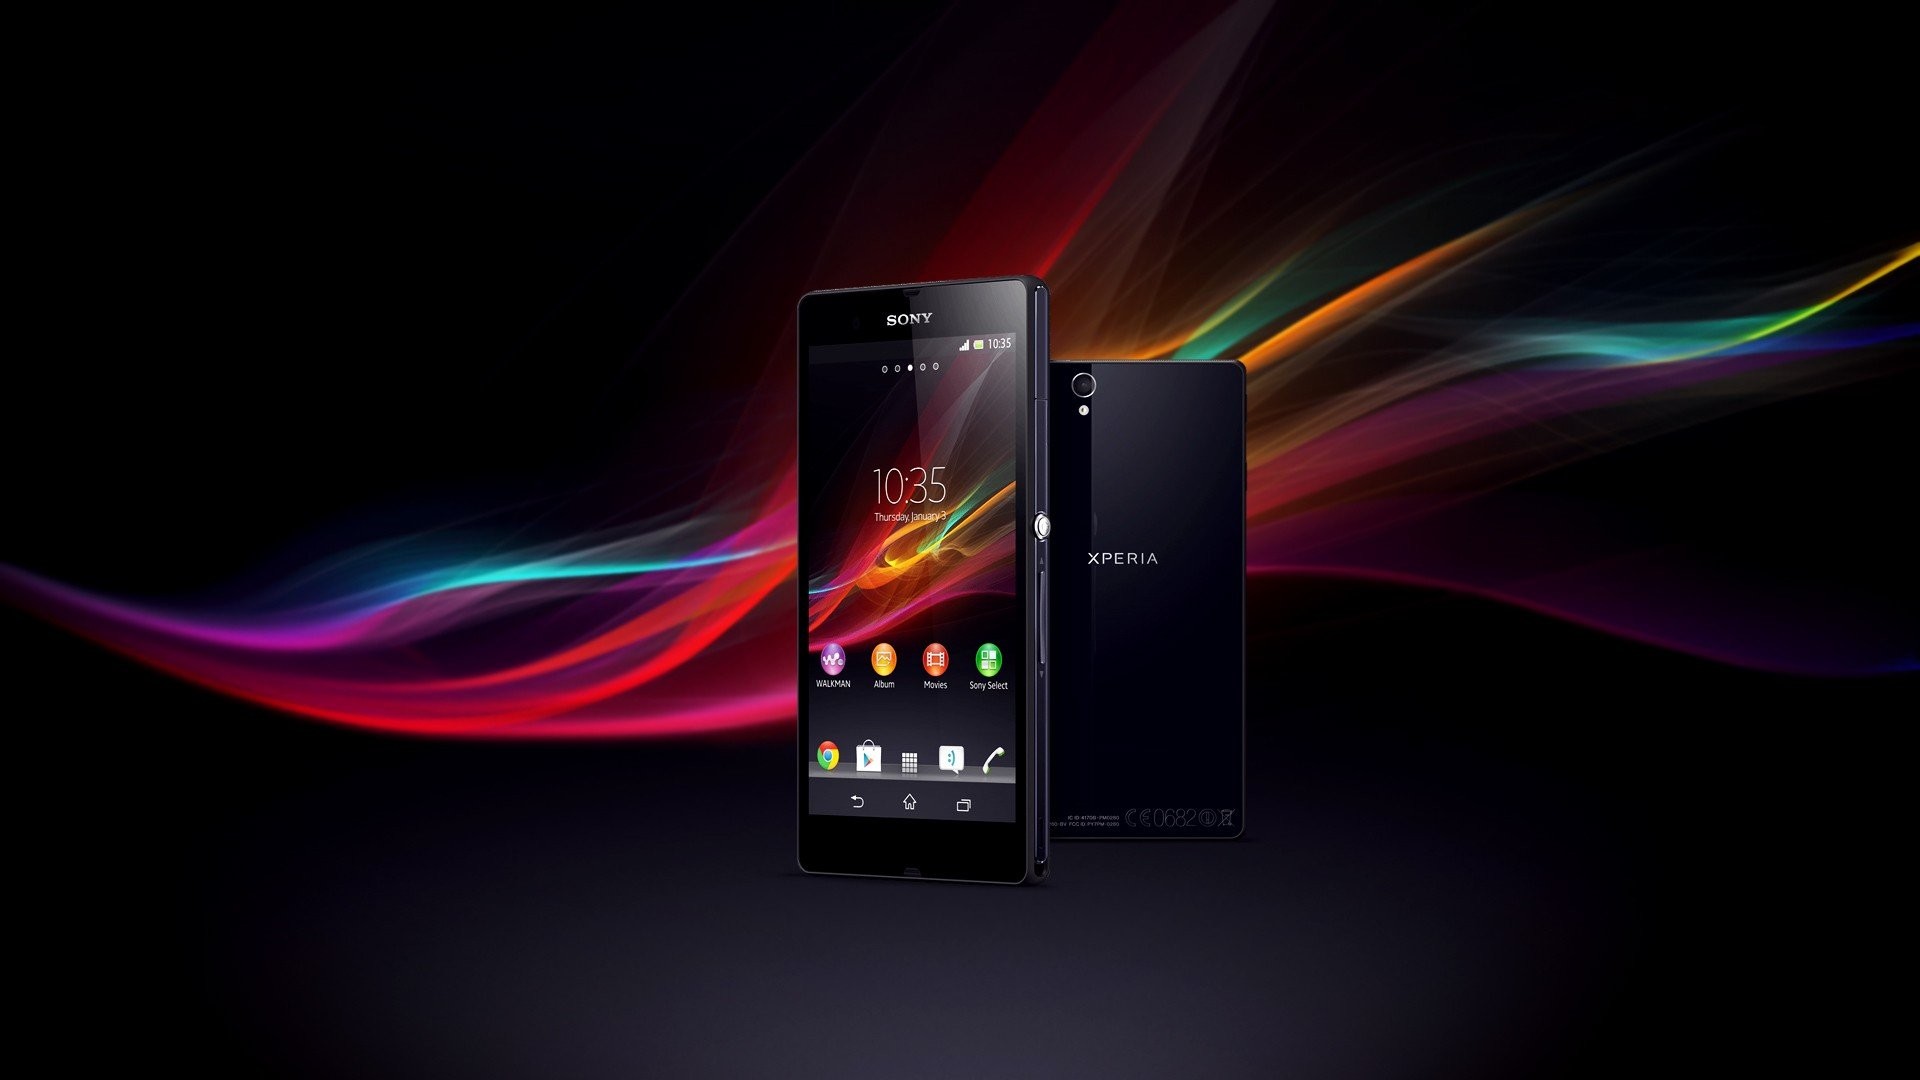 sony wallpaper full hd,gadget,product,technology,electronics,smartphone